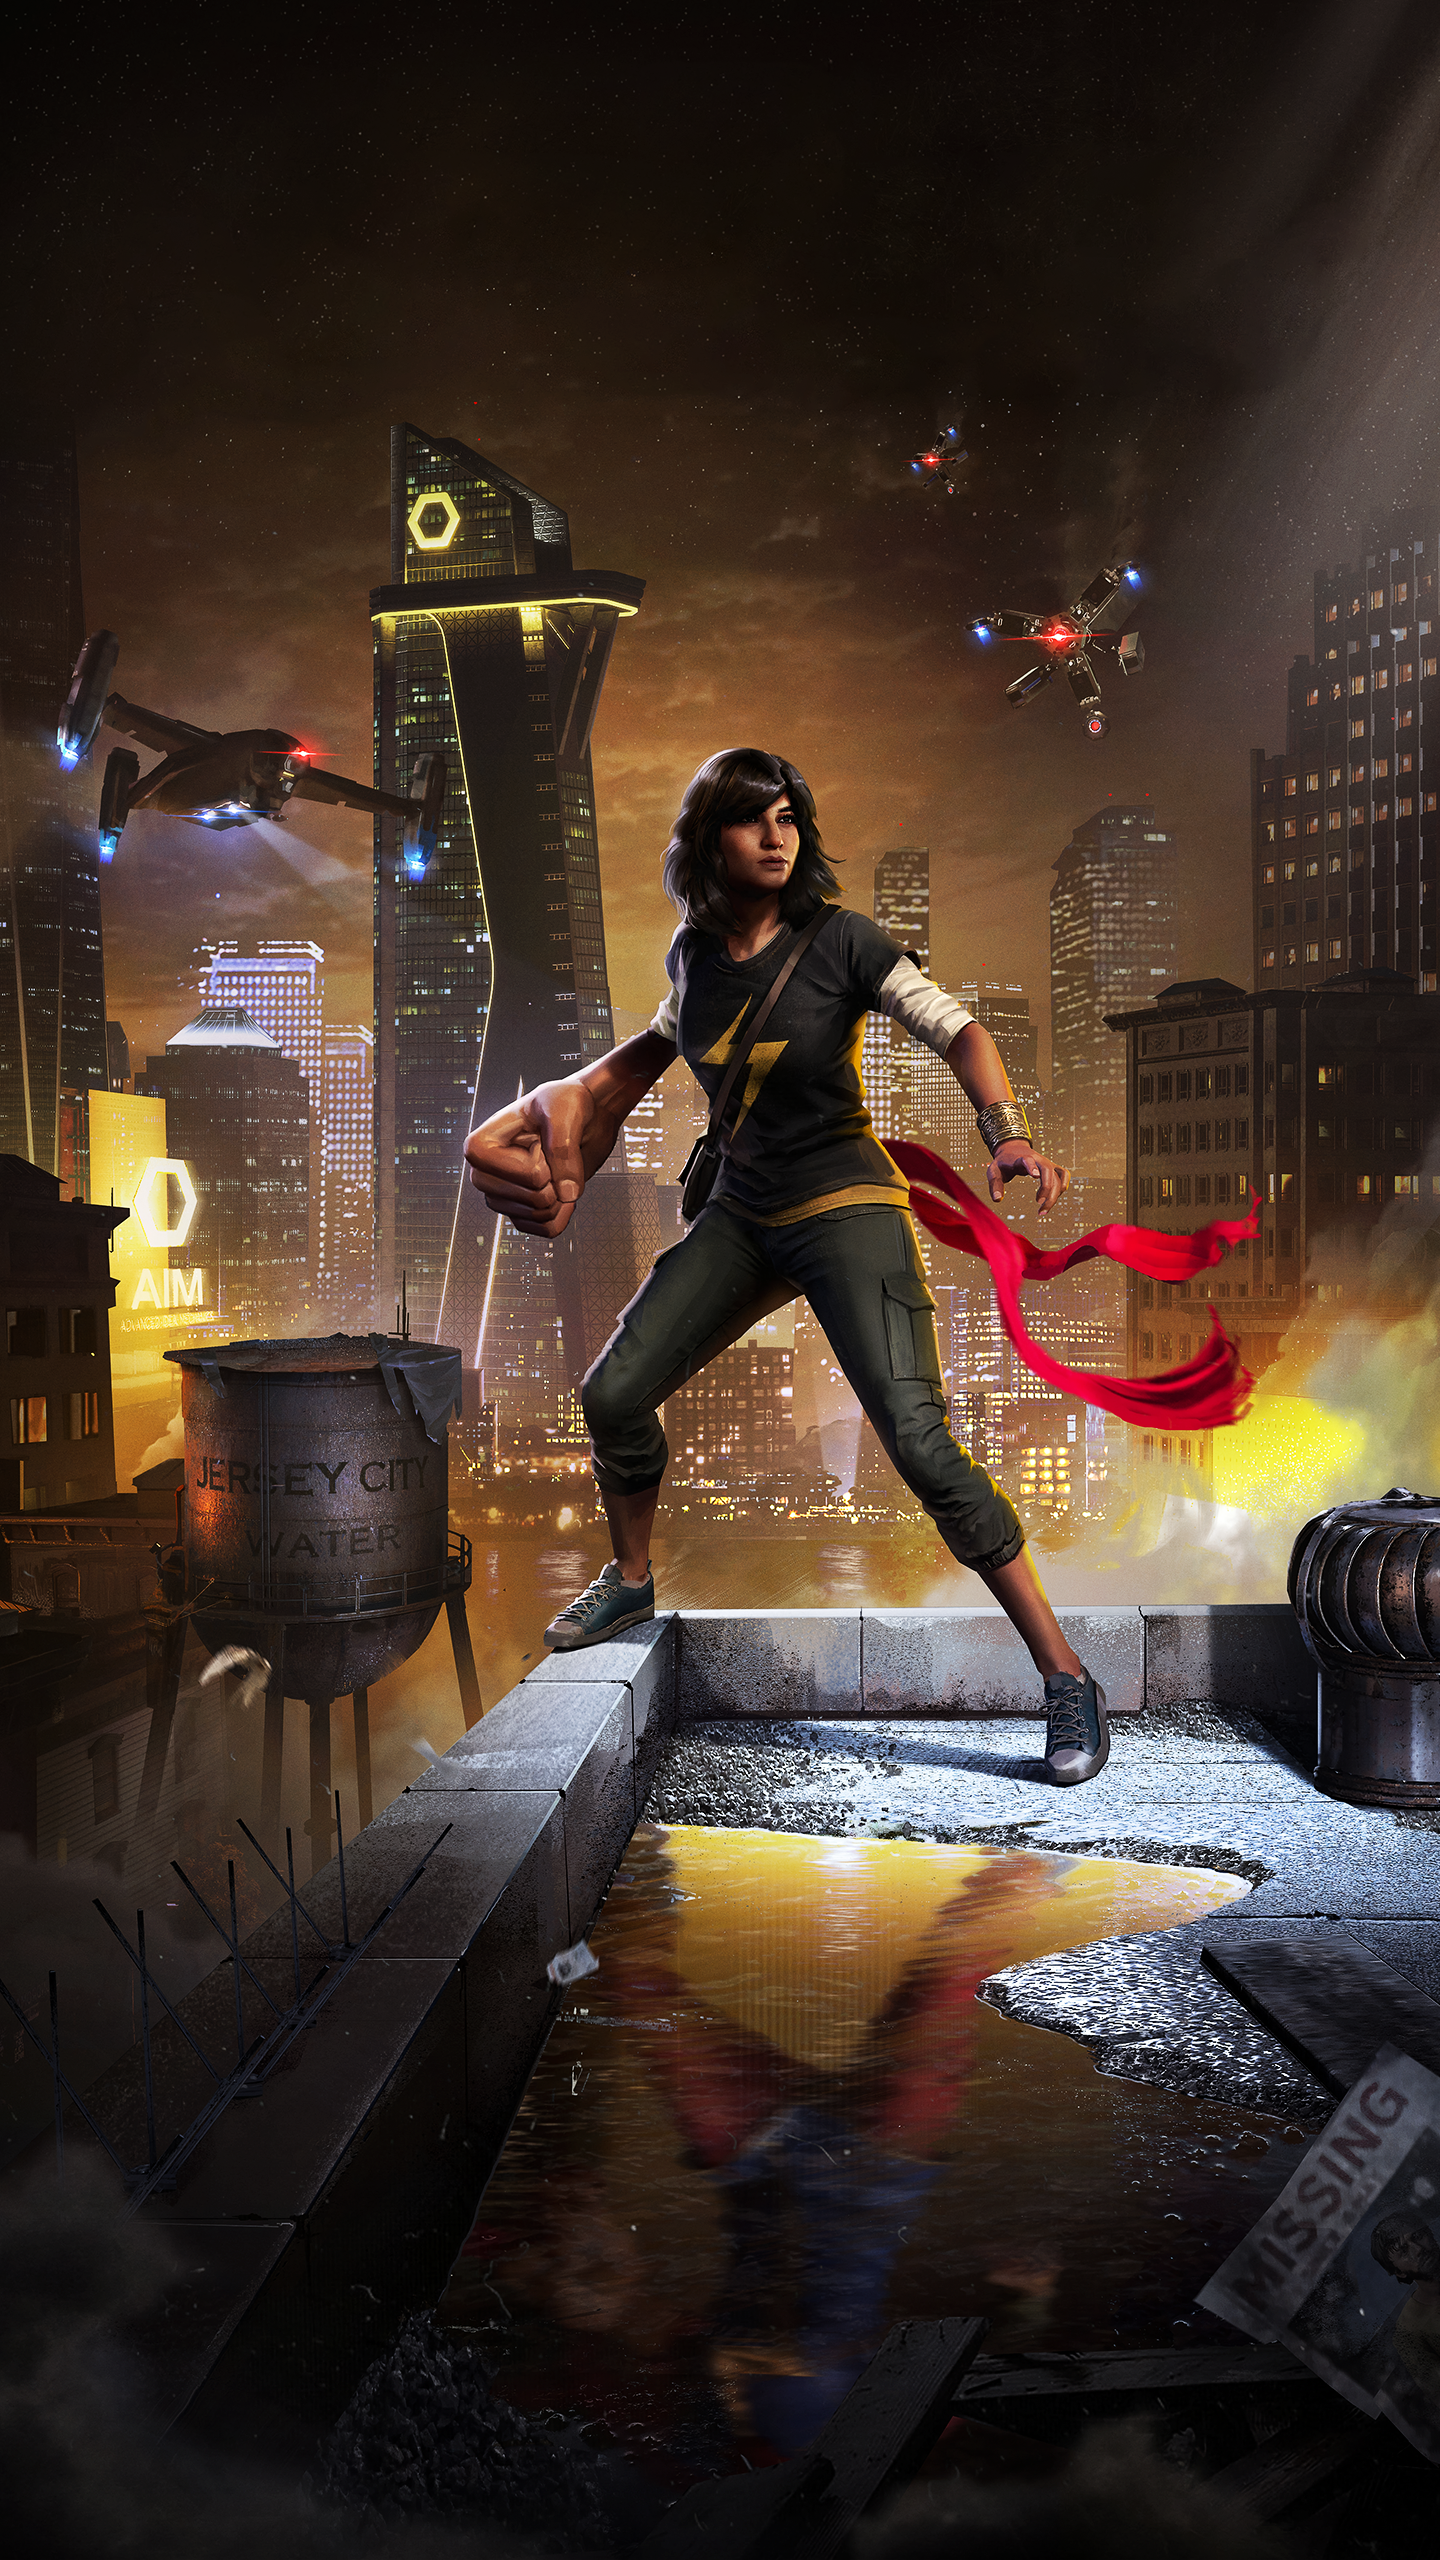 dejp96-Kamala_Khan__from_the_upcoming_Marvel_s_Avengers_game___1440x2560_-9qwn77xri4r31.png